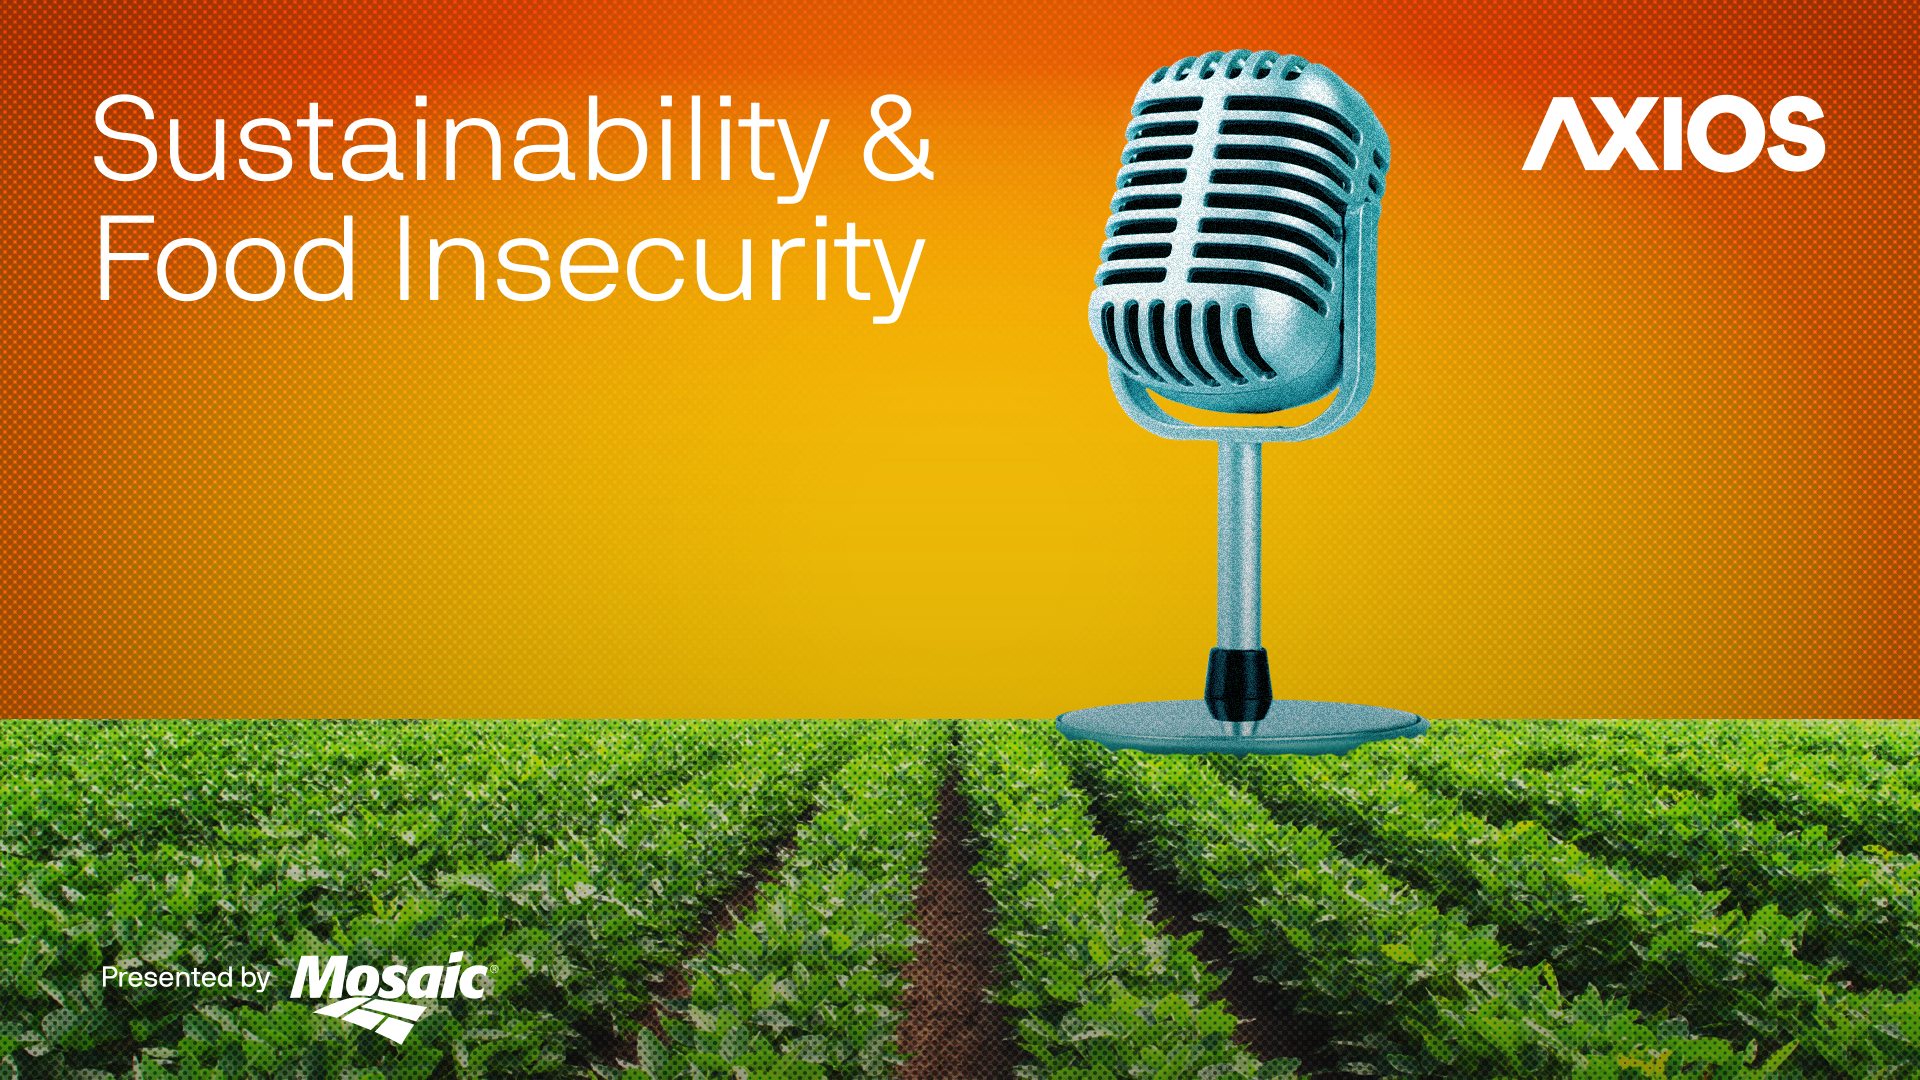 Axios' Sustainability & Food Insecurity